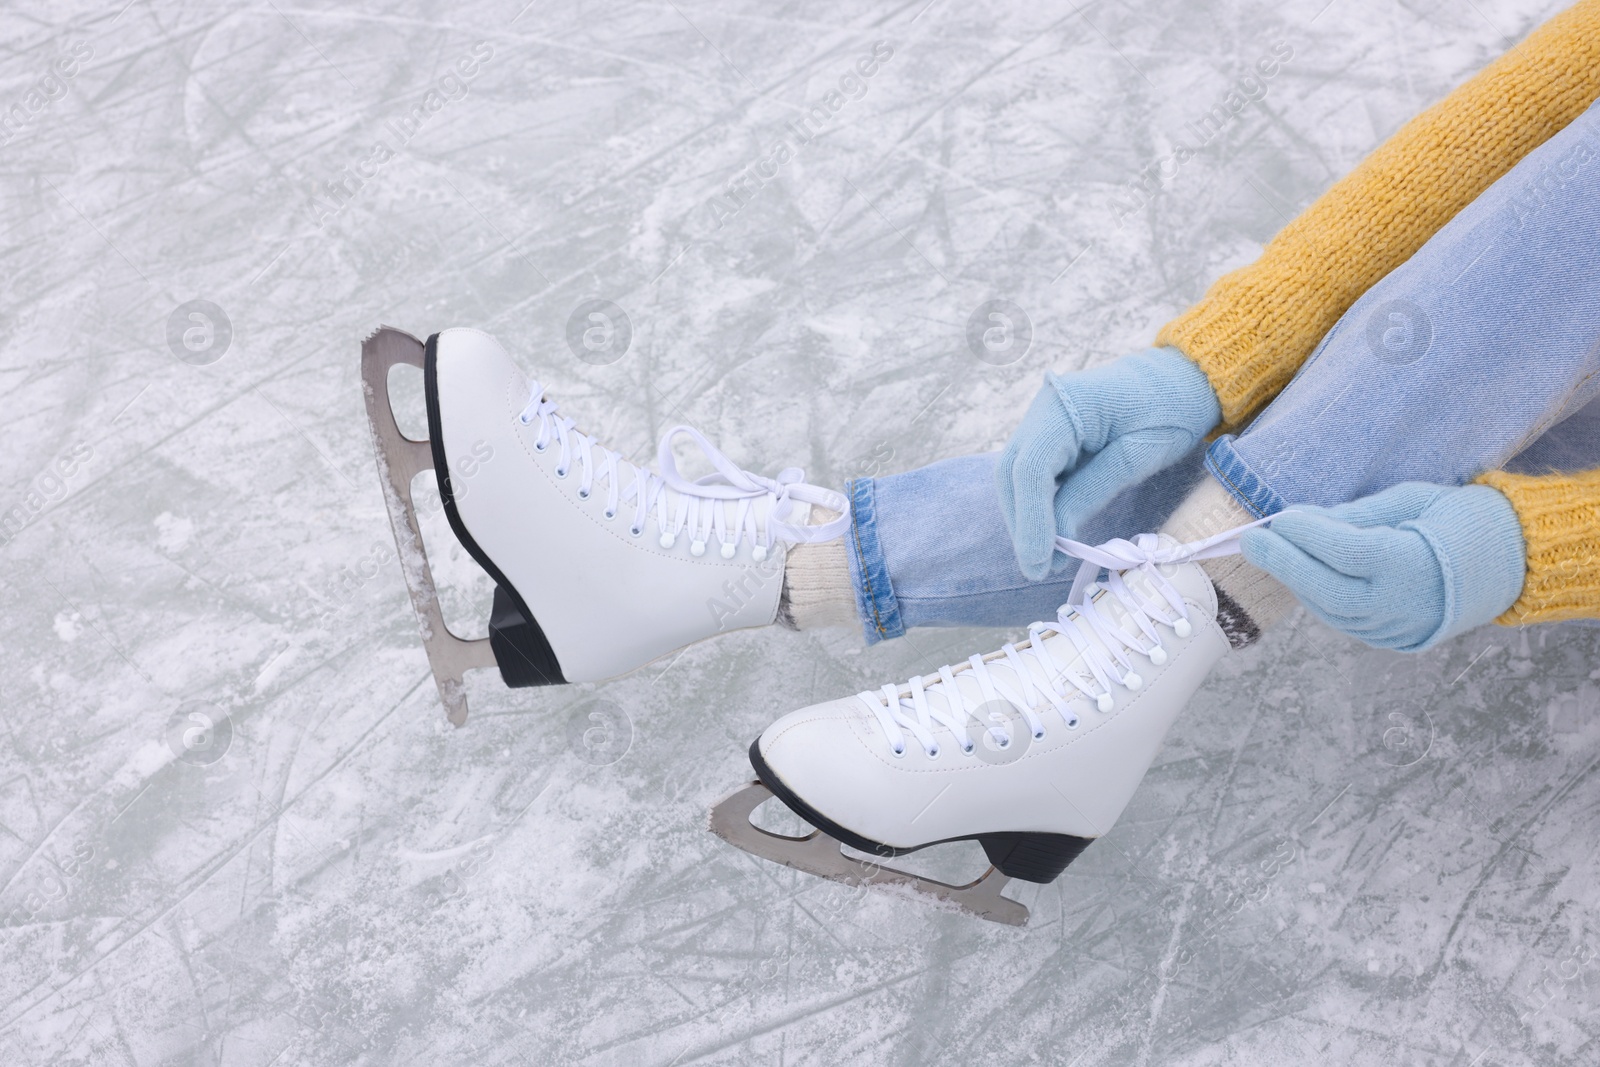 Photo of Woman lacing figure skates on ice, above view